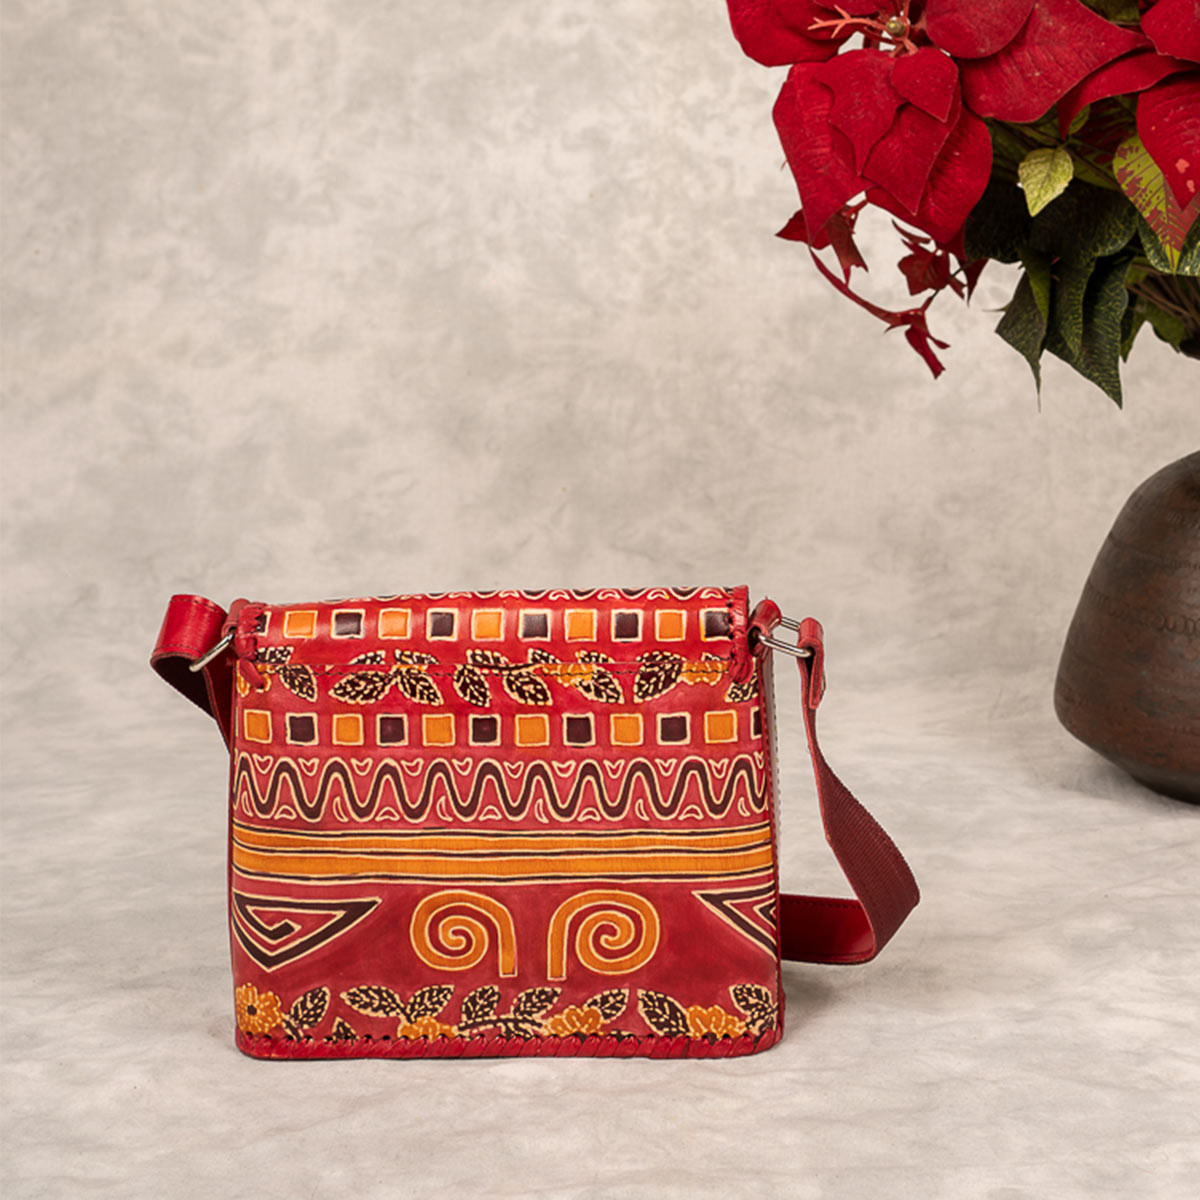 Printed Leather Side Bag (Red)